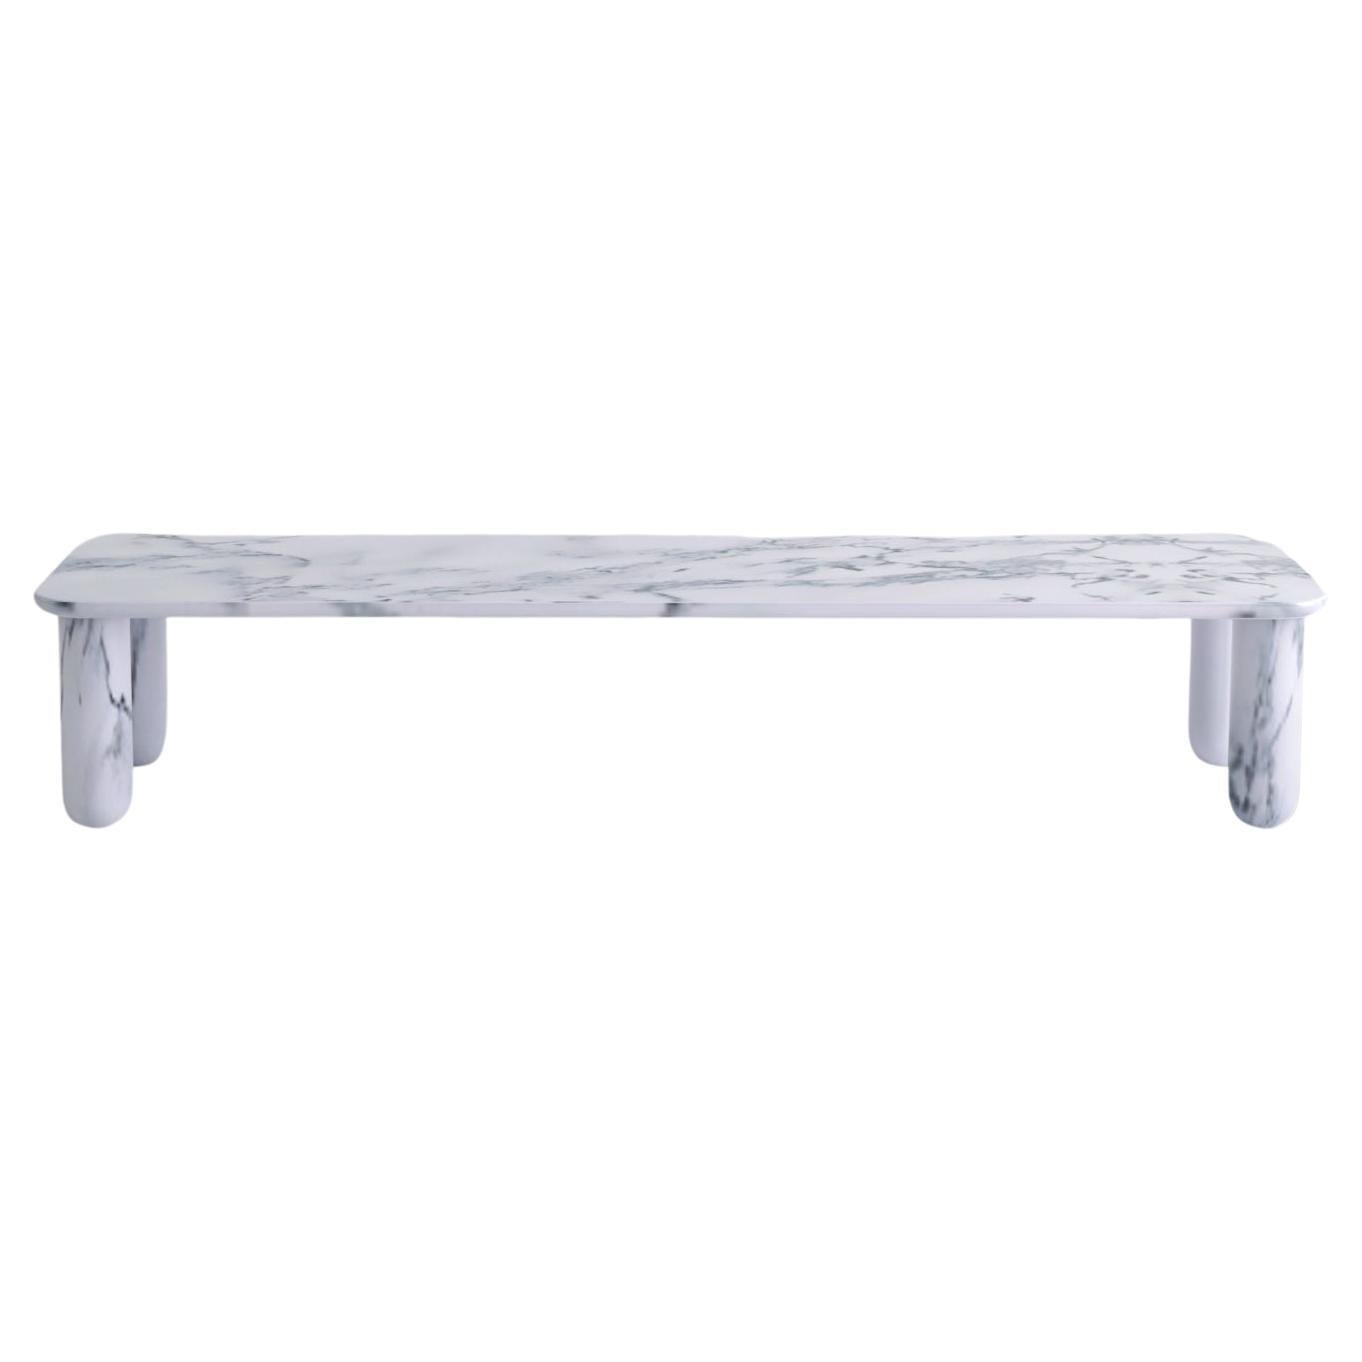 Large White Marble "Sunday" Coffee Table, Jean-Baptiste Souletie